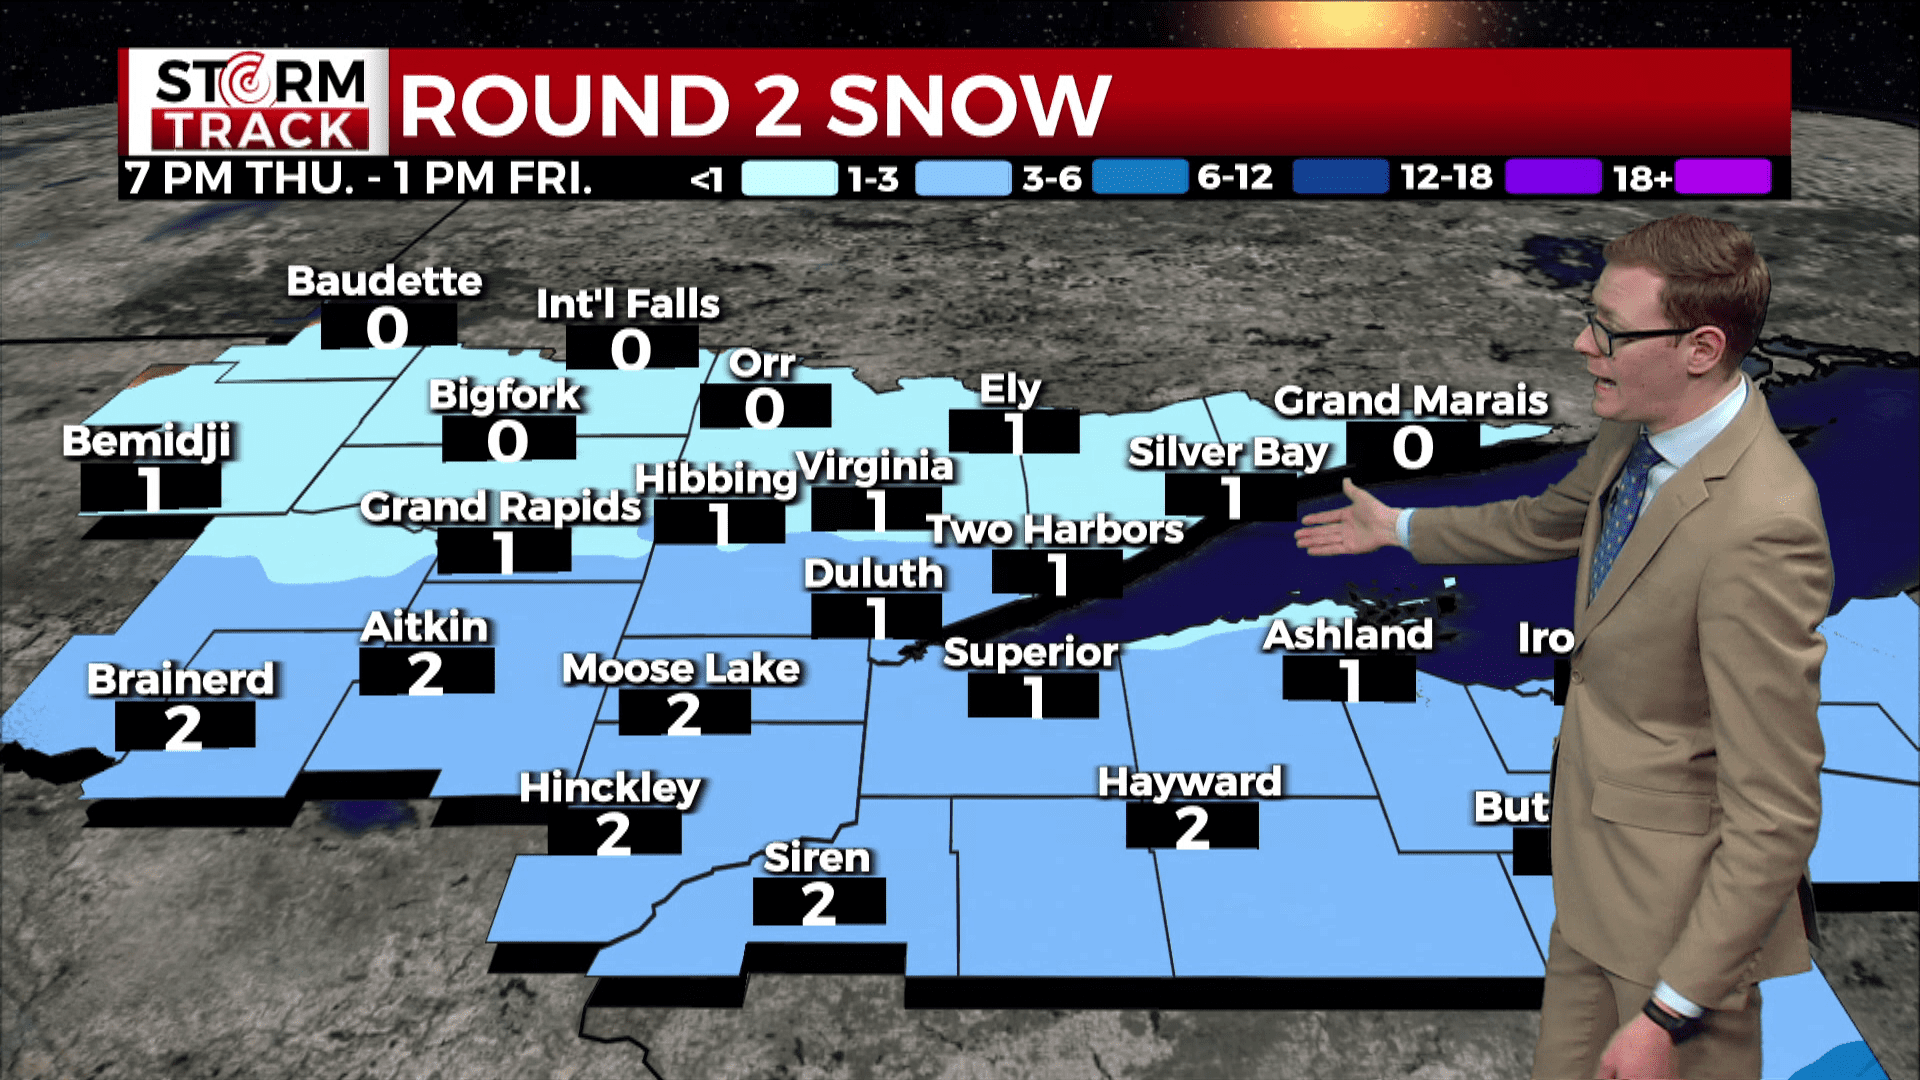 Brandon showing expected snow amounts for 7 pm Thursday to 1 pm Friday